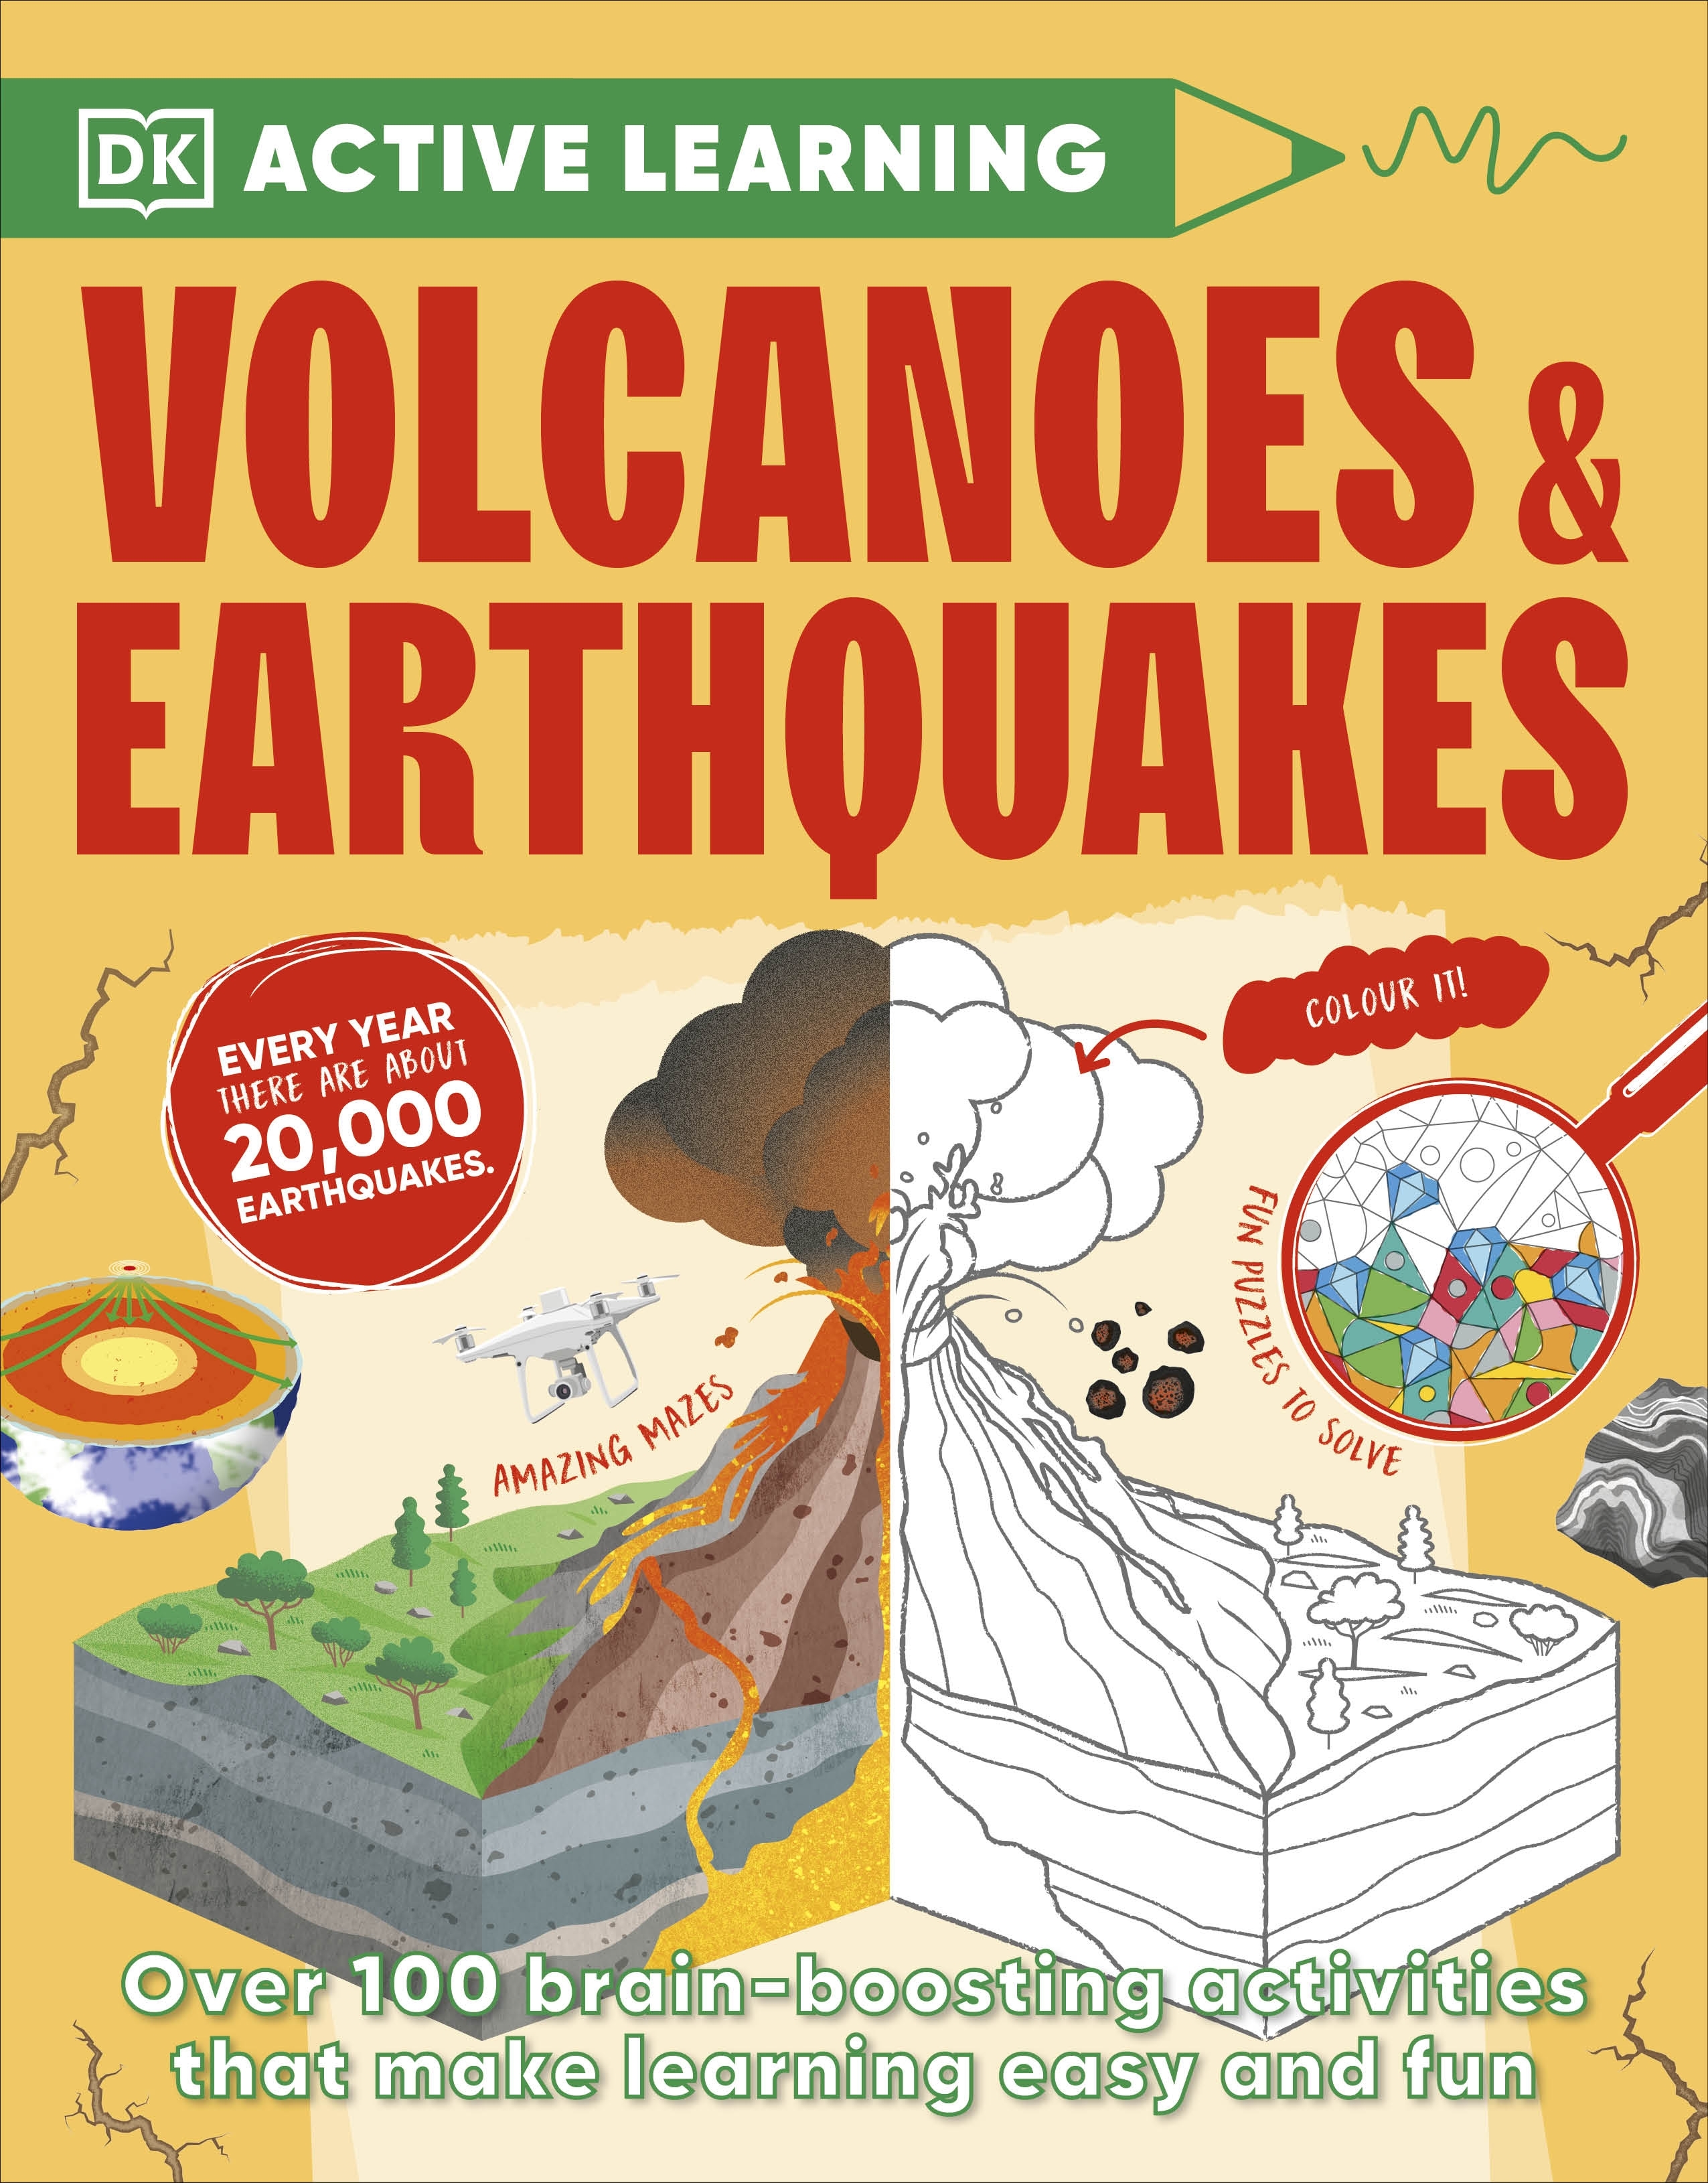 DK Active Learning : Volcanoes and Earthquakes